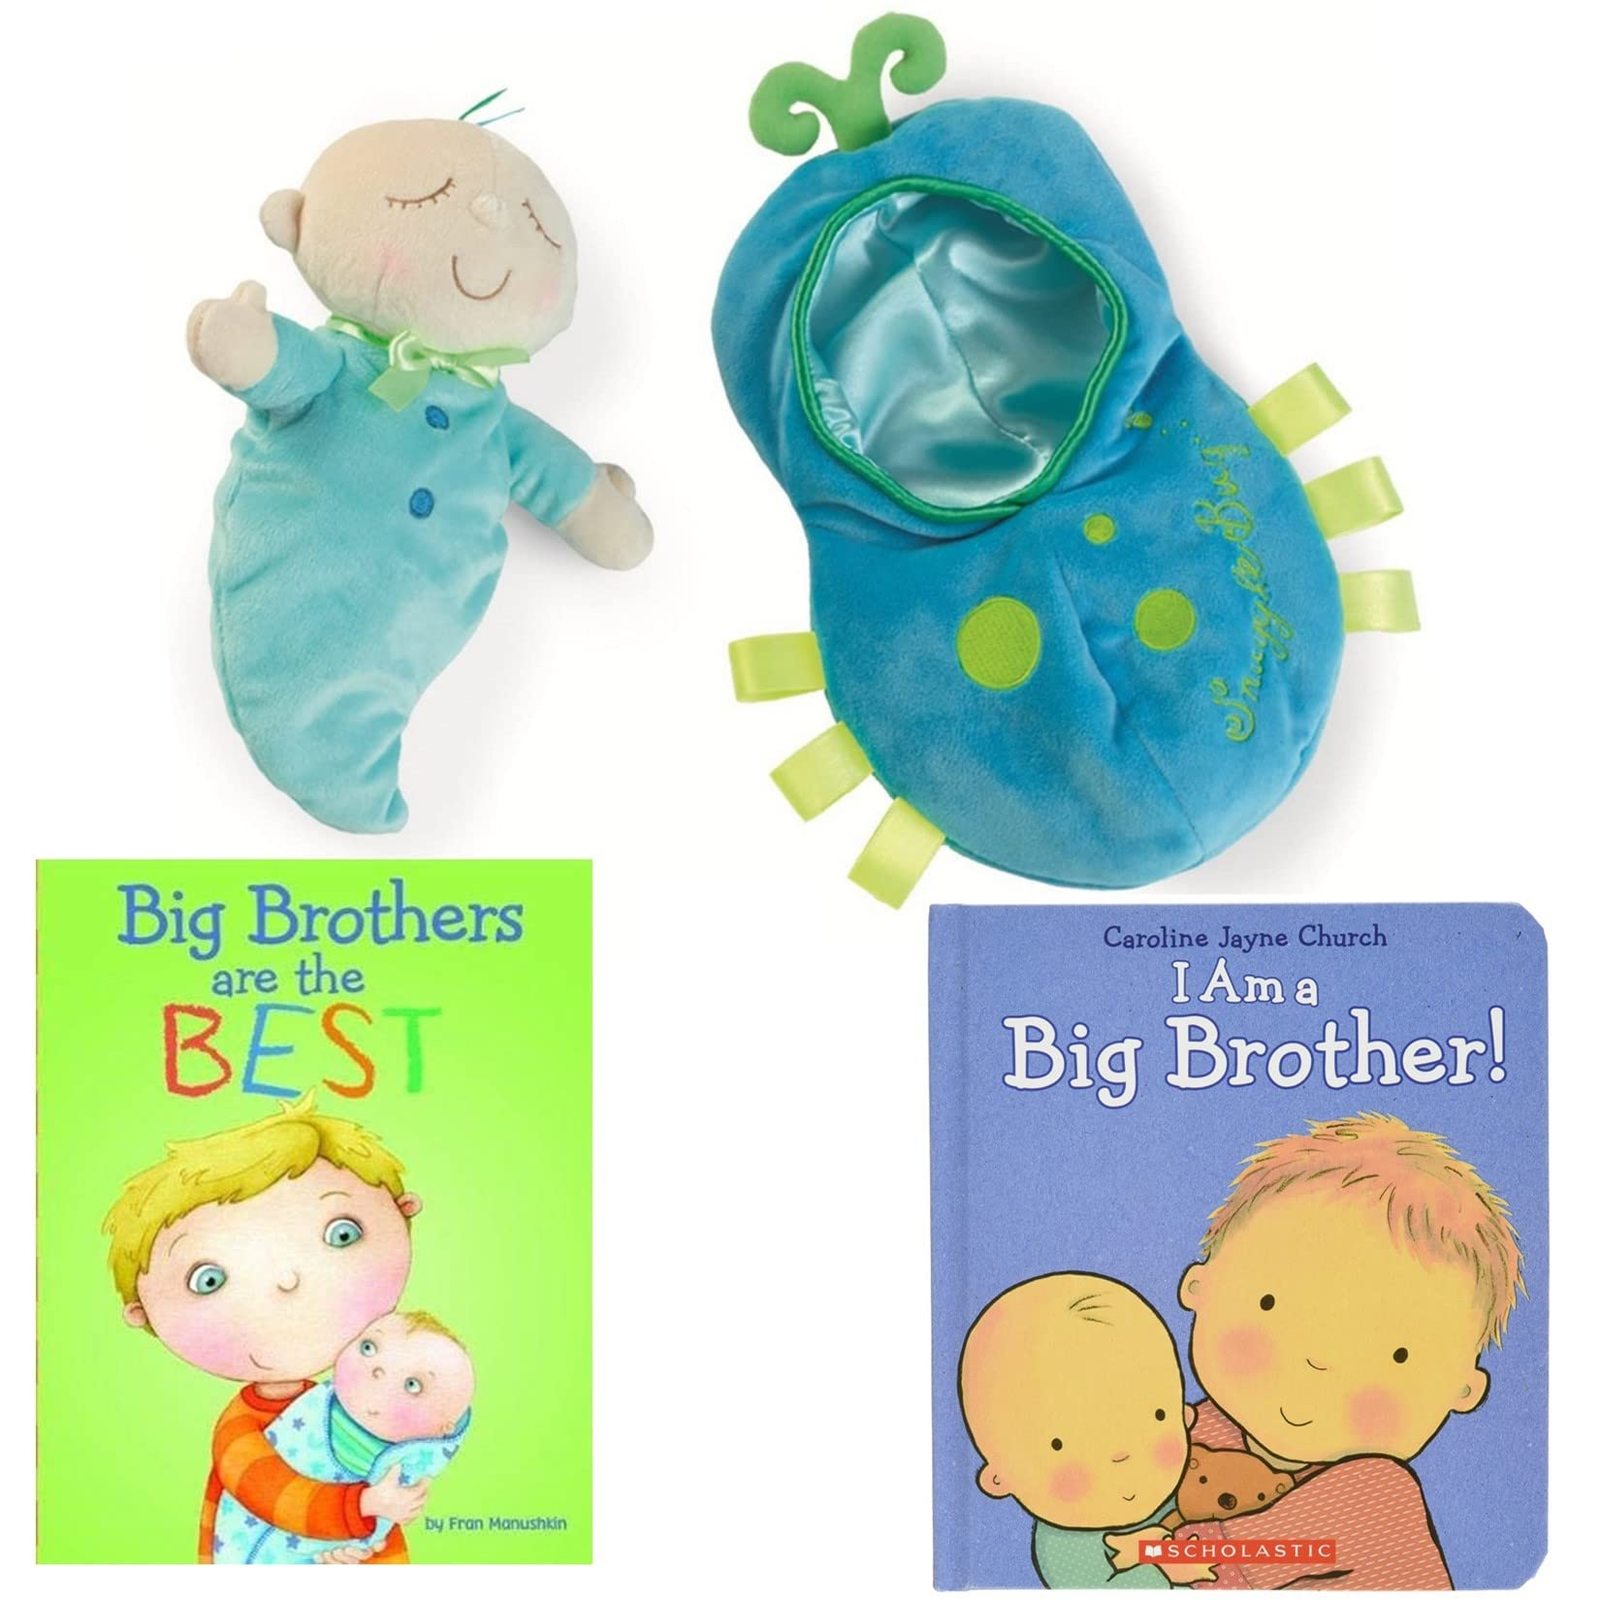 Sibling Gift - I Am a Big Brother and Big Brothers are The Best Hardcovers, Snug - $39.99